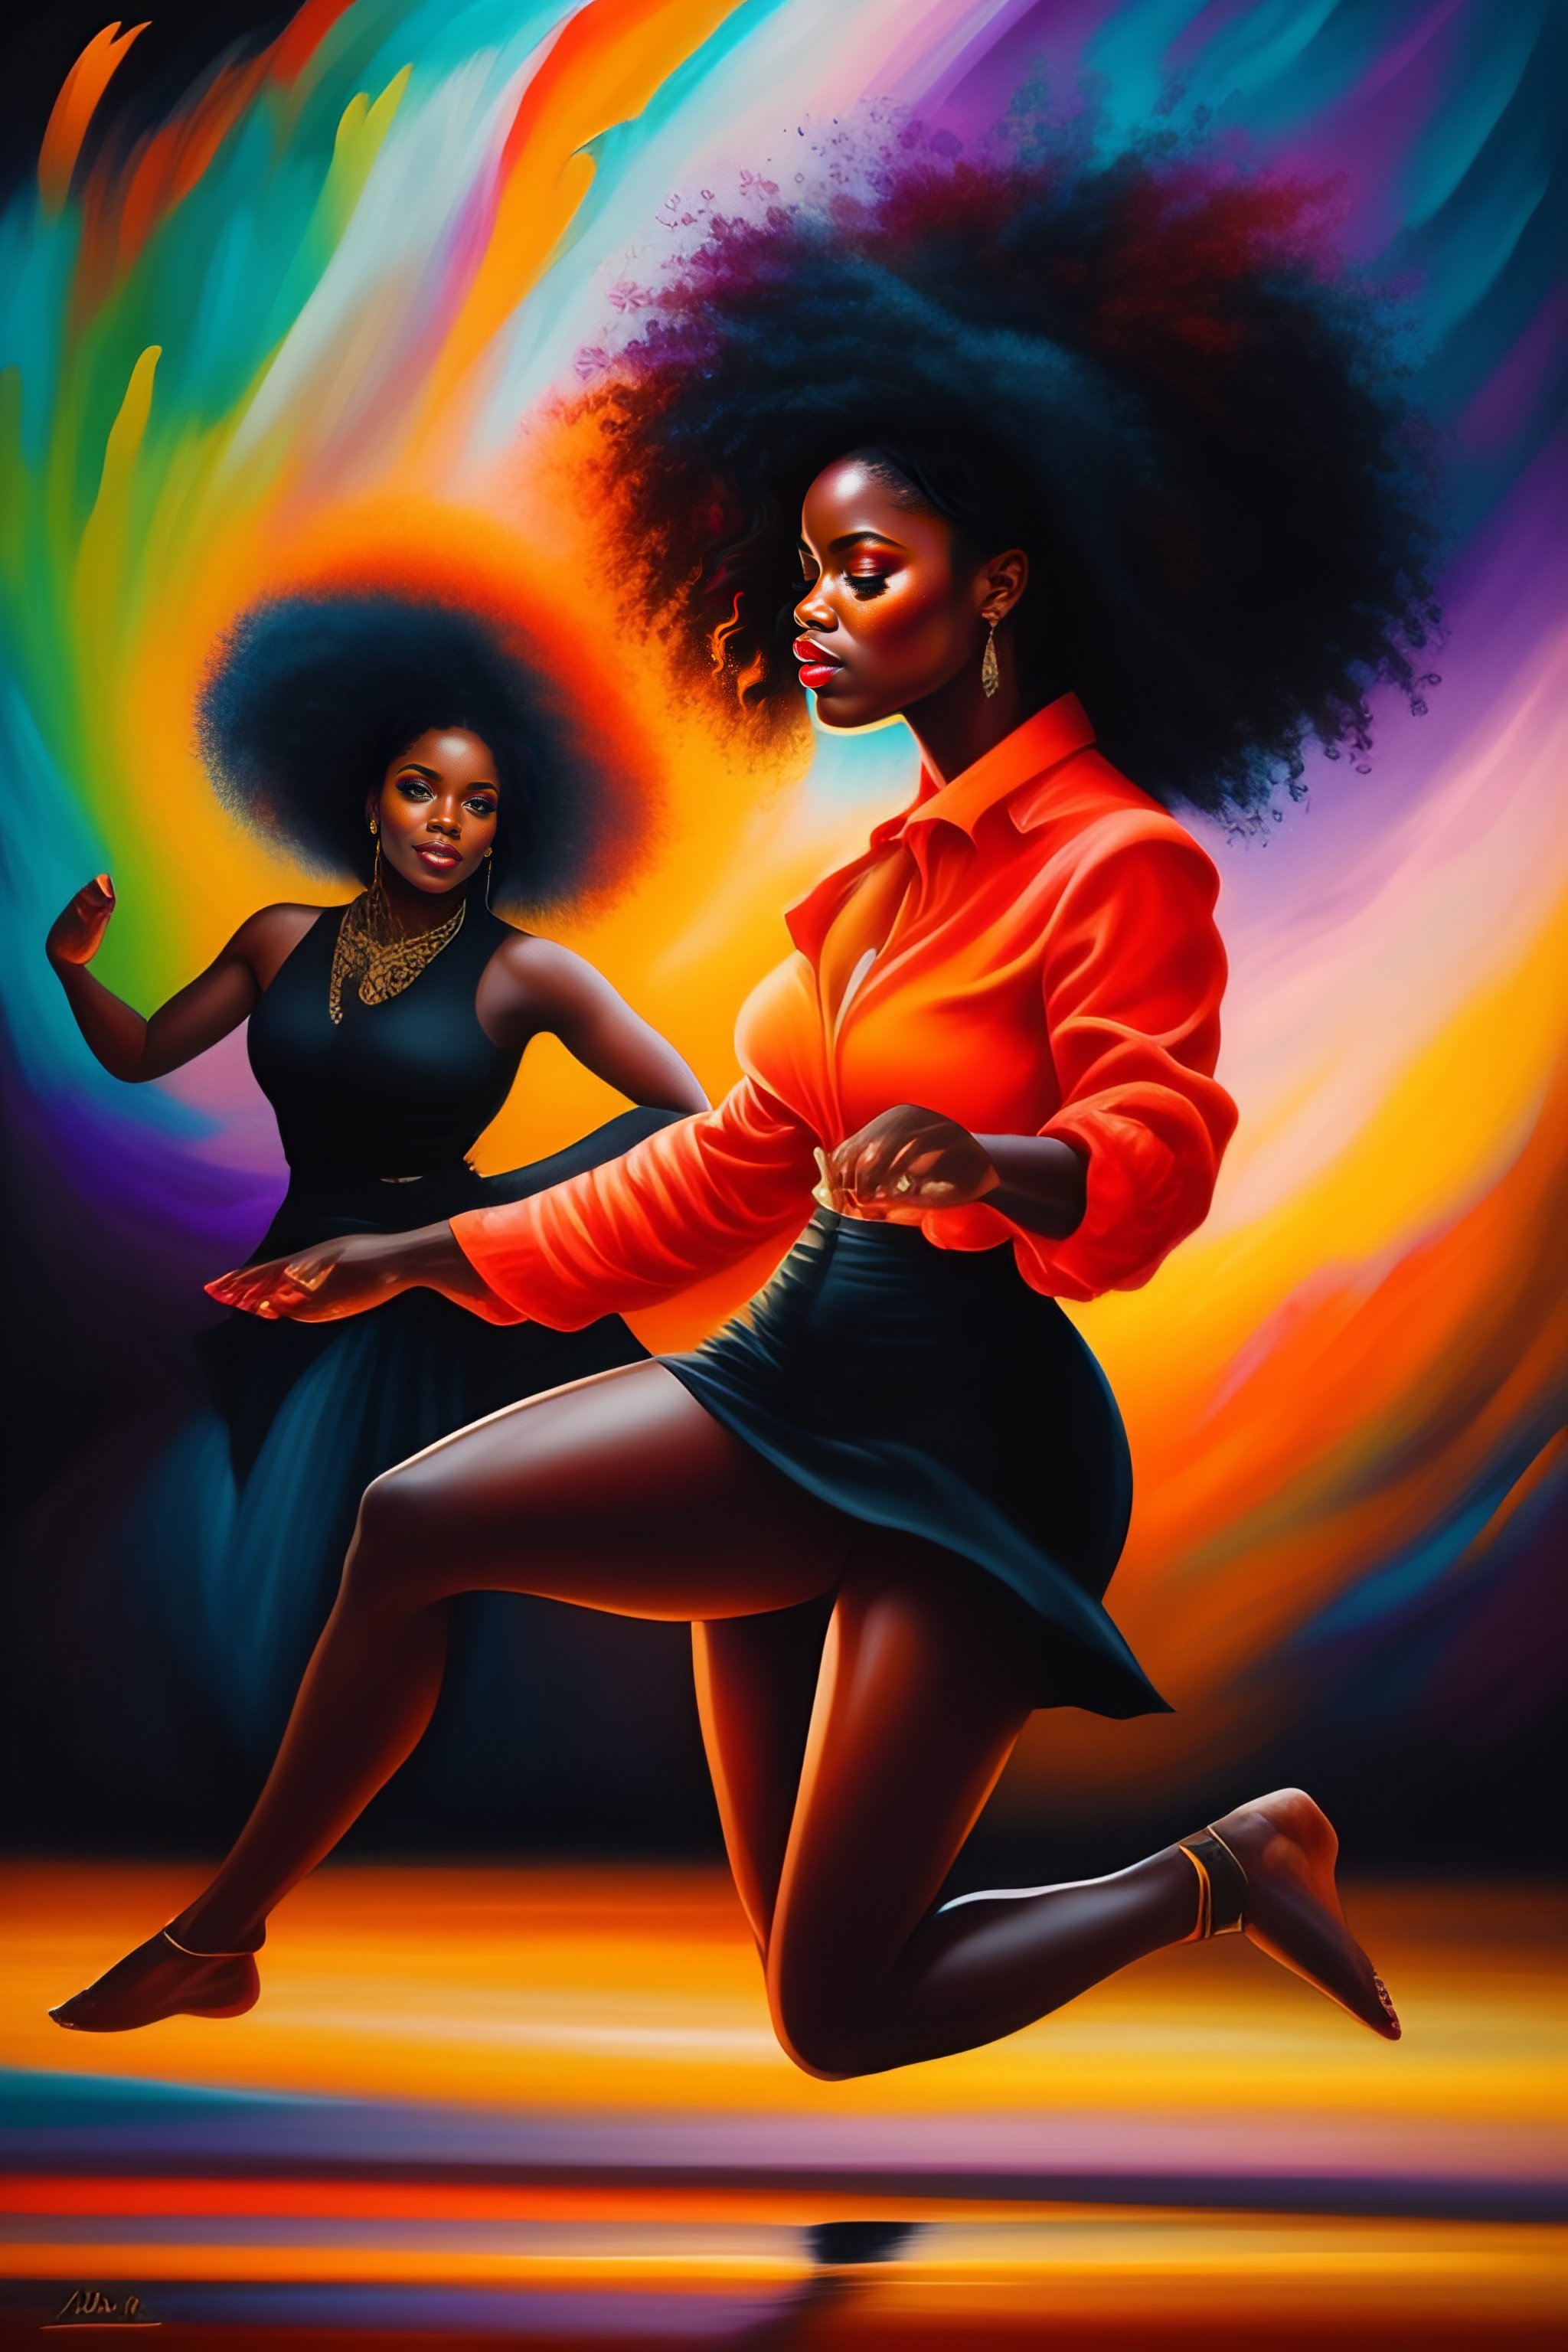 Lexica - Black people dancing and having a good time painting art